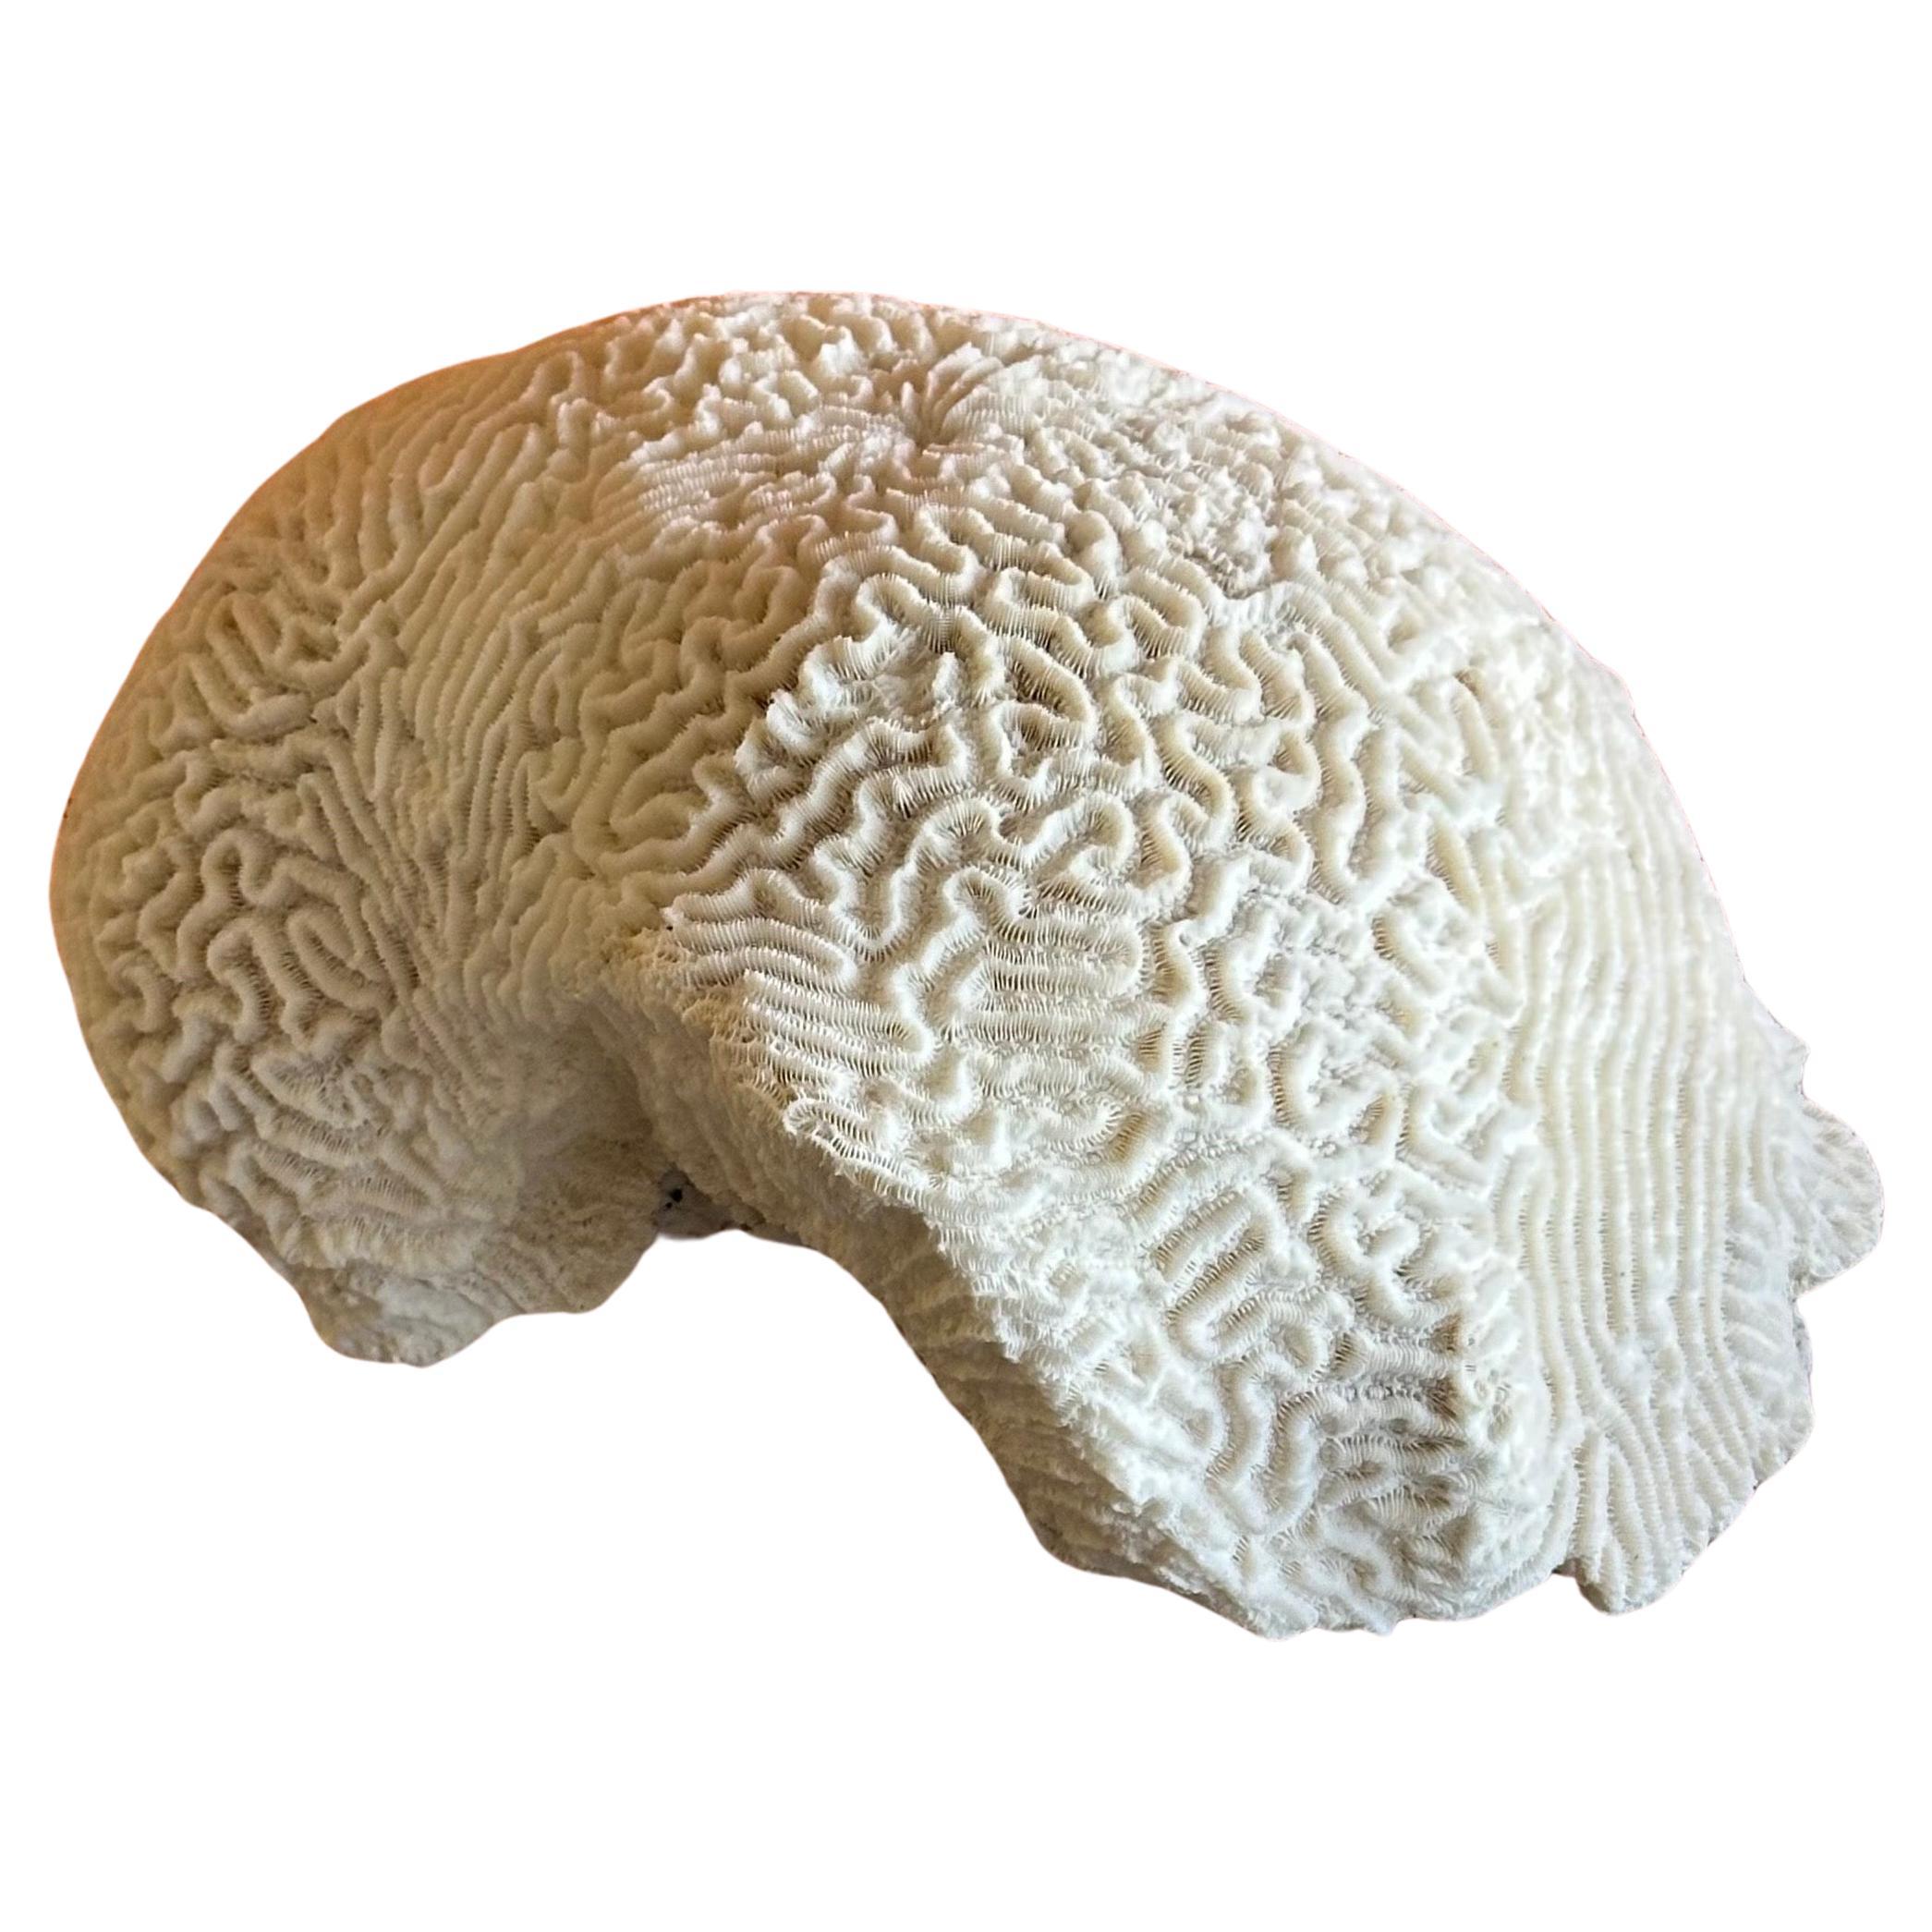 Large Natural White "Brain" Sea Coral Specimen on Lucite Stand